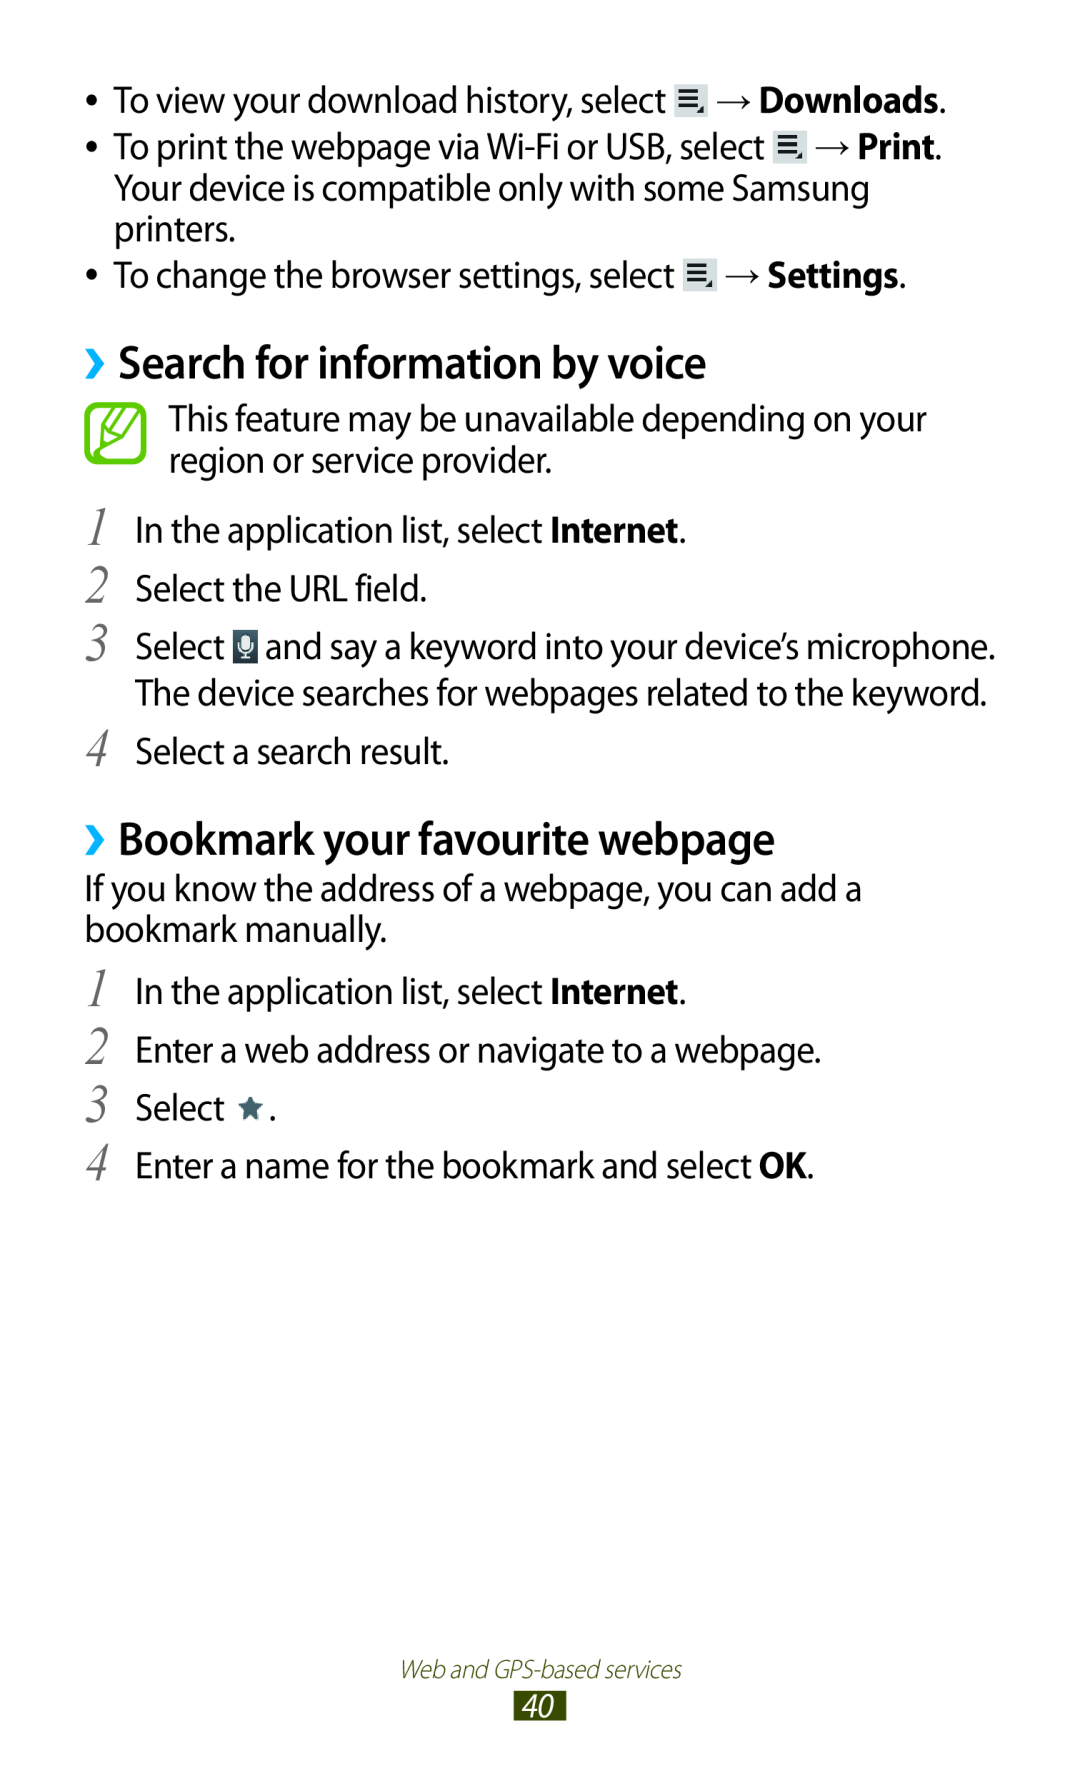 Samsung GTP5110ZWMTTT manual ››Search for information by voice, ››Bookmark your favourite webpage 